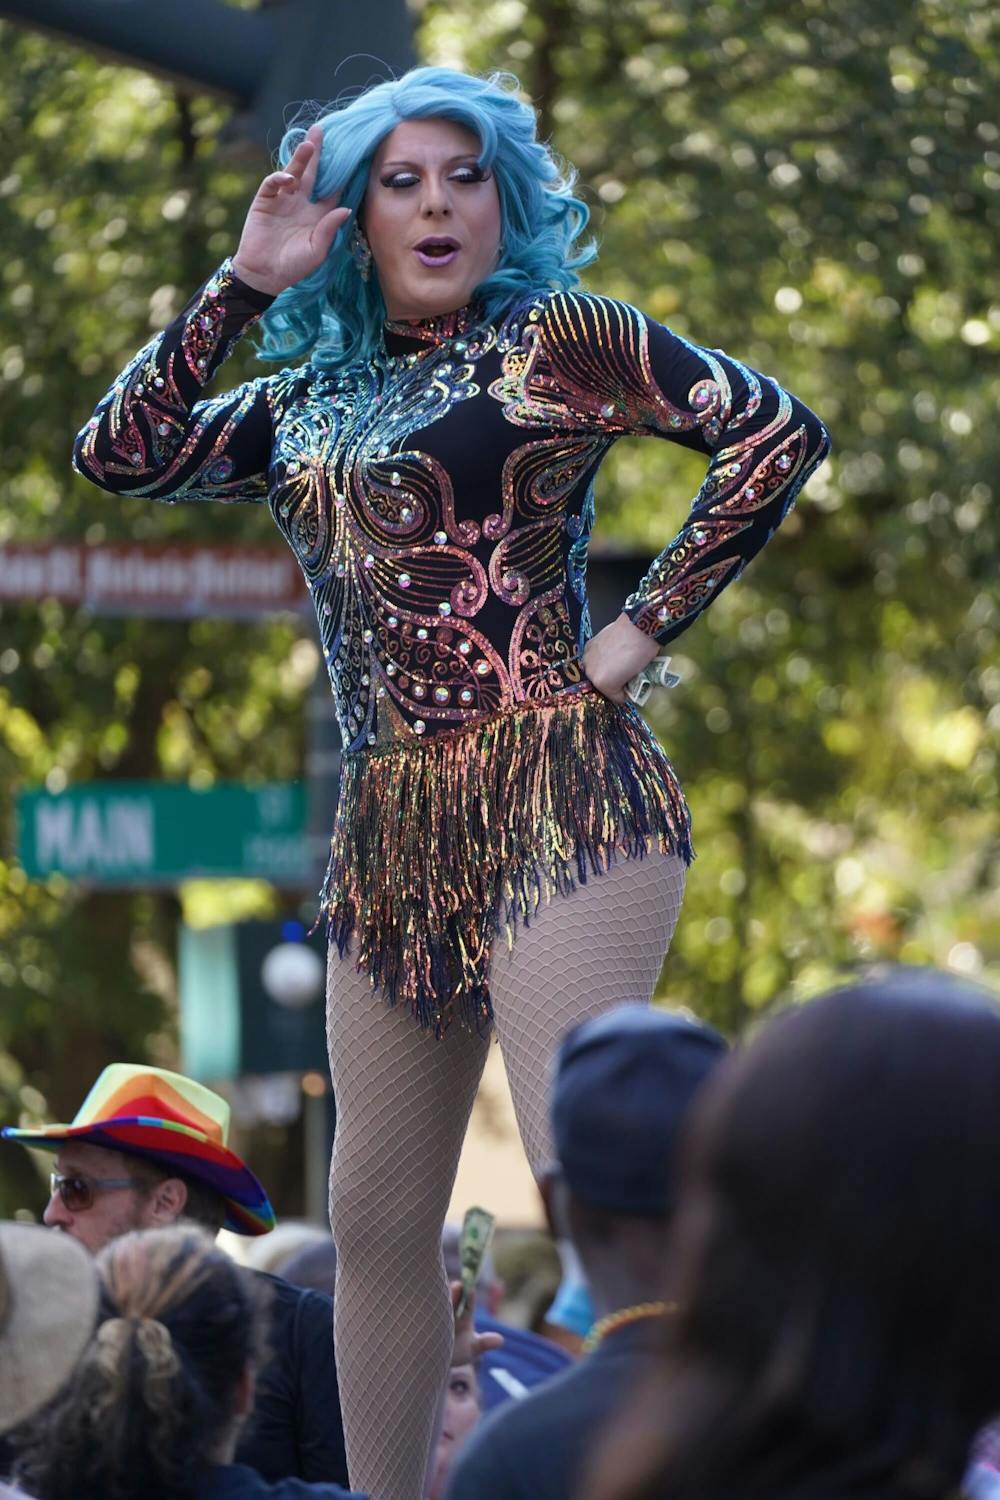 <p>Carla Cox, the entertainment coordinator for South Carolina Pride, gives an on-stage performance. Cox is one of many drag performers to participate in shows at the Famously Hot South Carolina Pride Festival.</p>